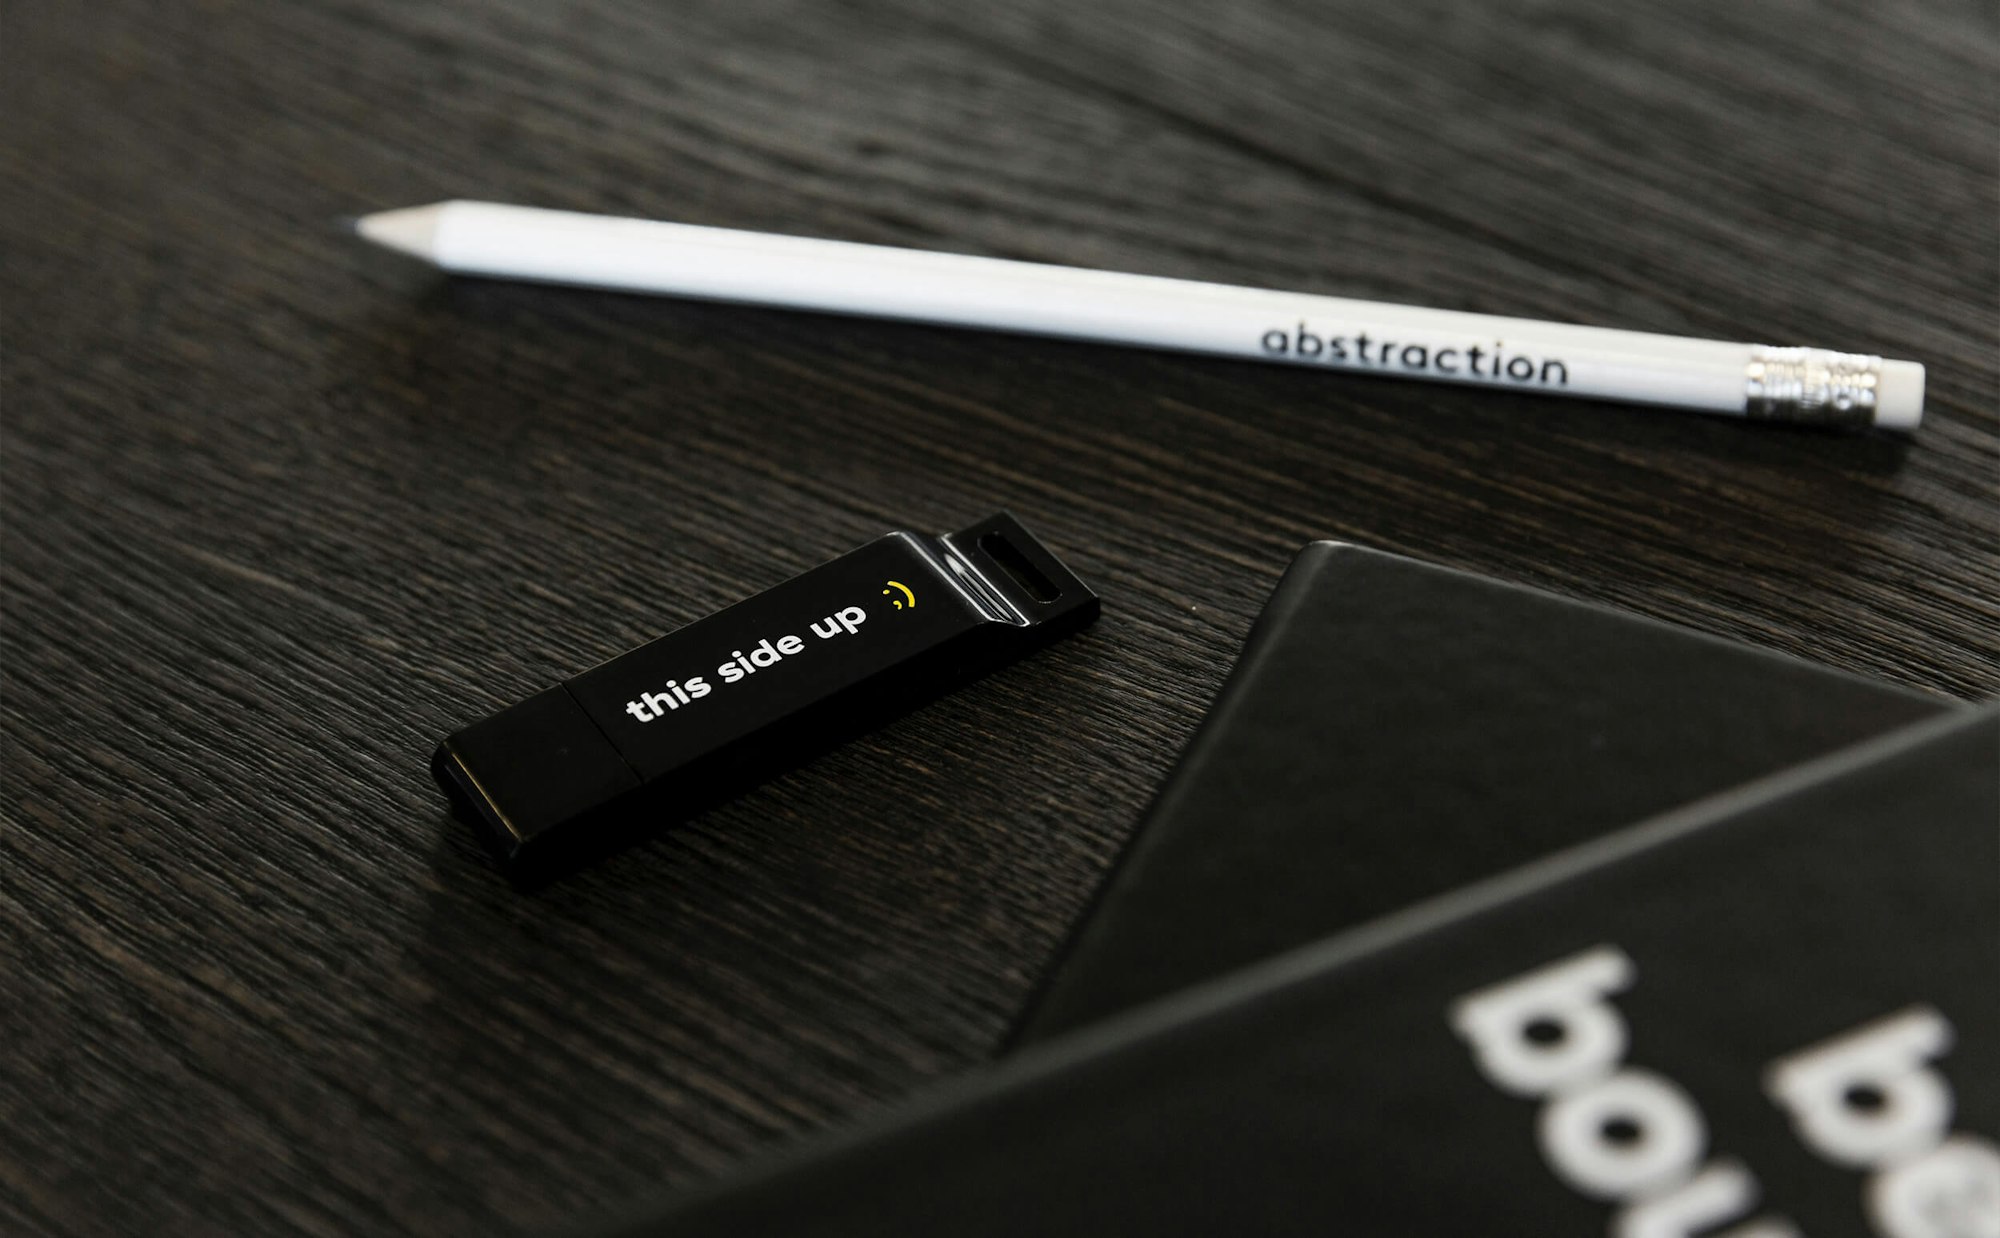 USB Stick Branding For Company Stuurmen Abstraction